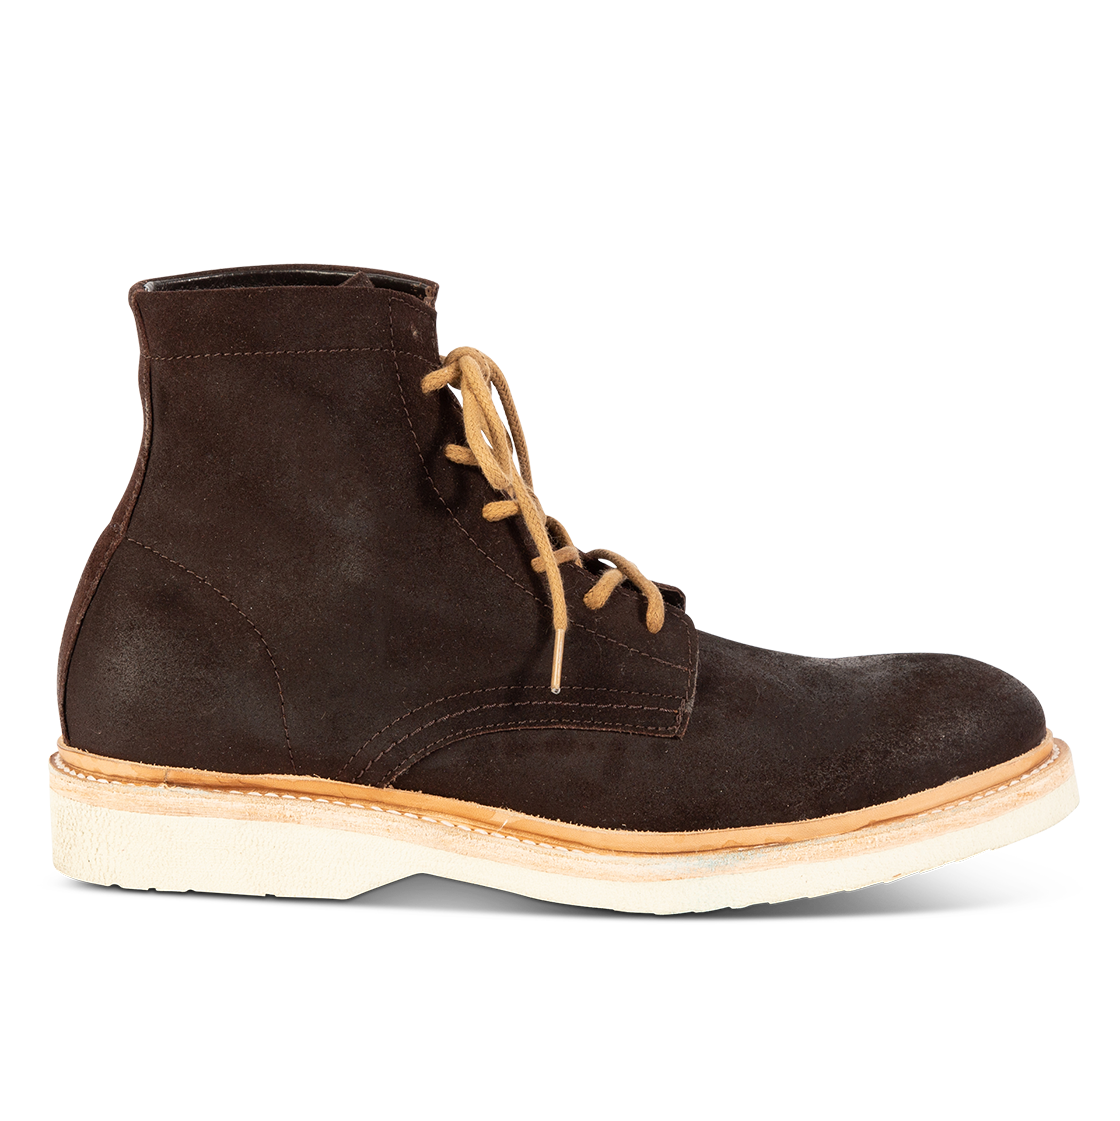 FREEBIRD men's Wheeler brown suede shoe with adjustable front lacing and soft sole